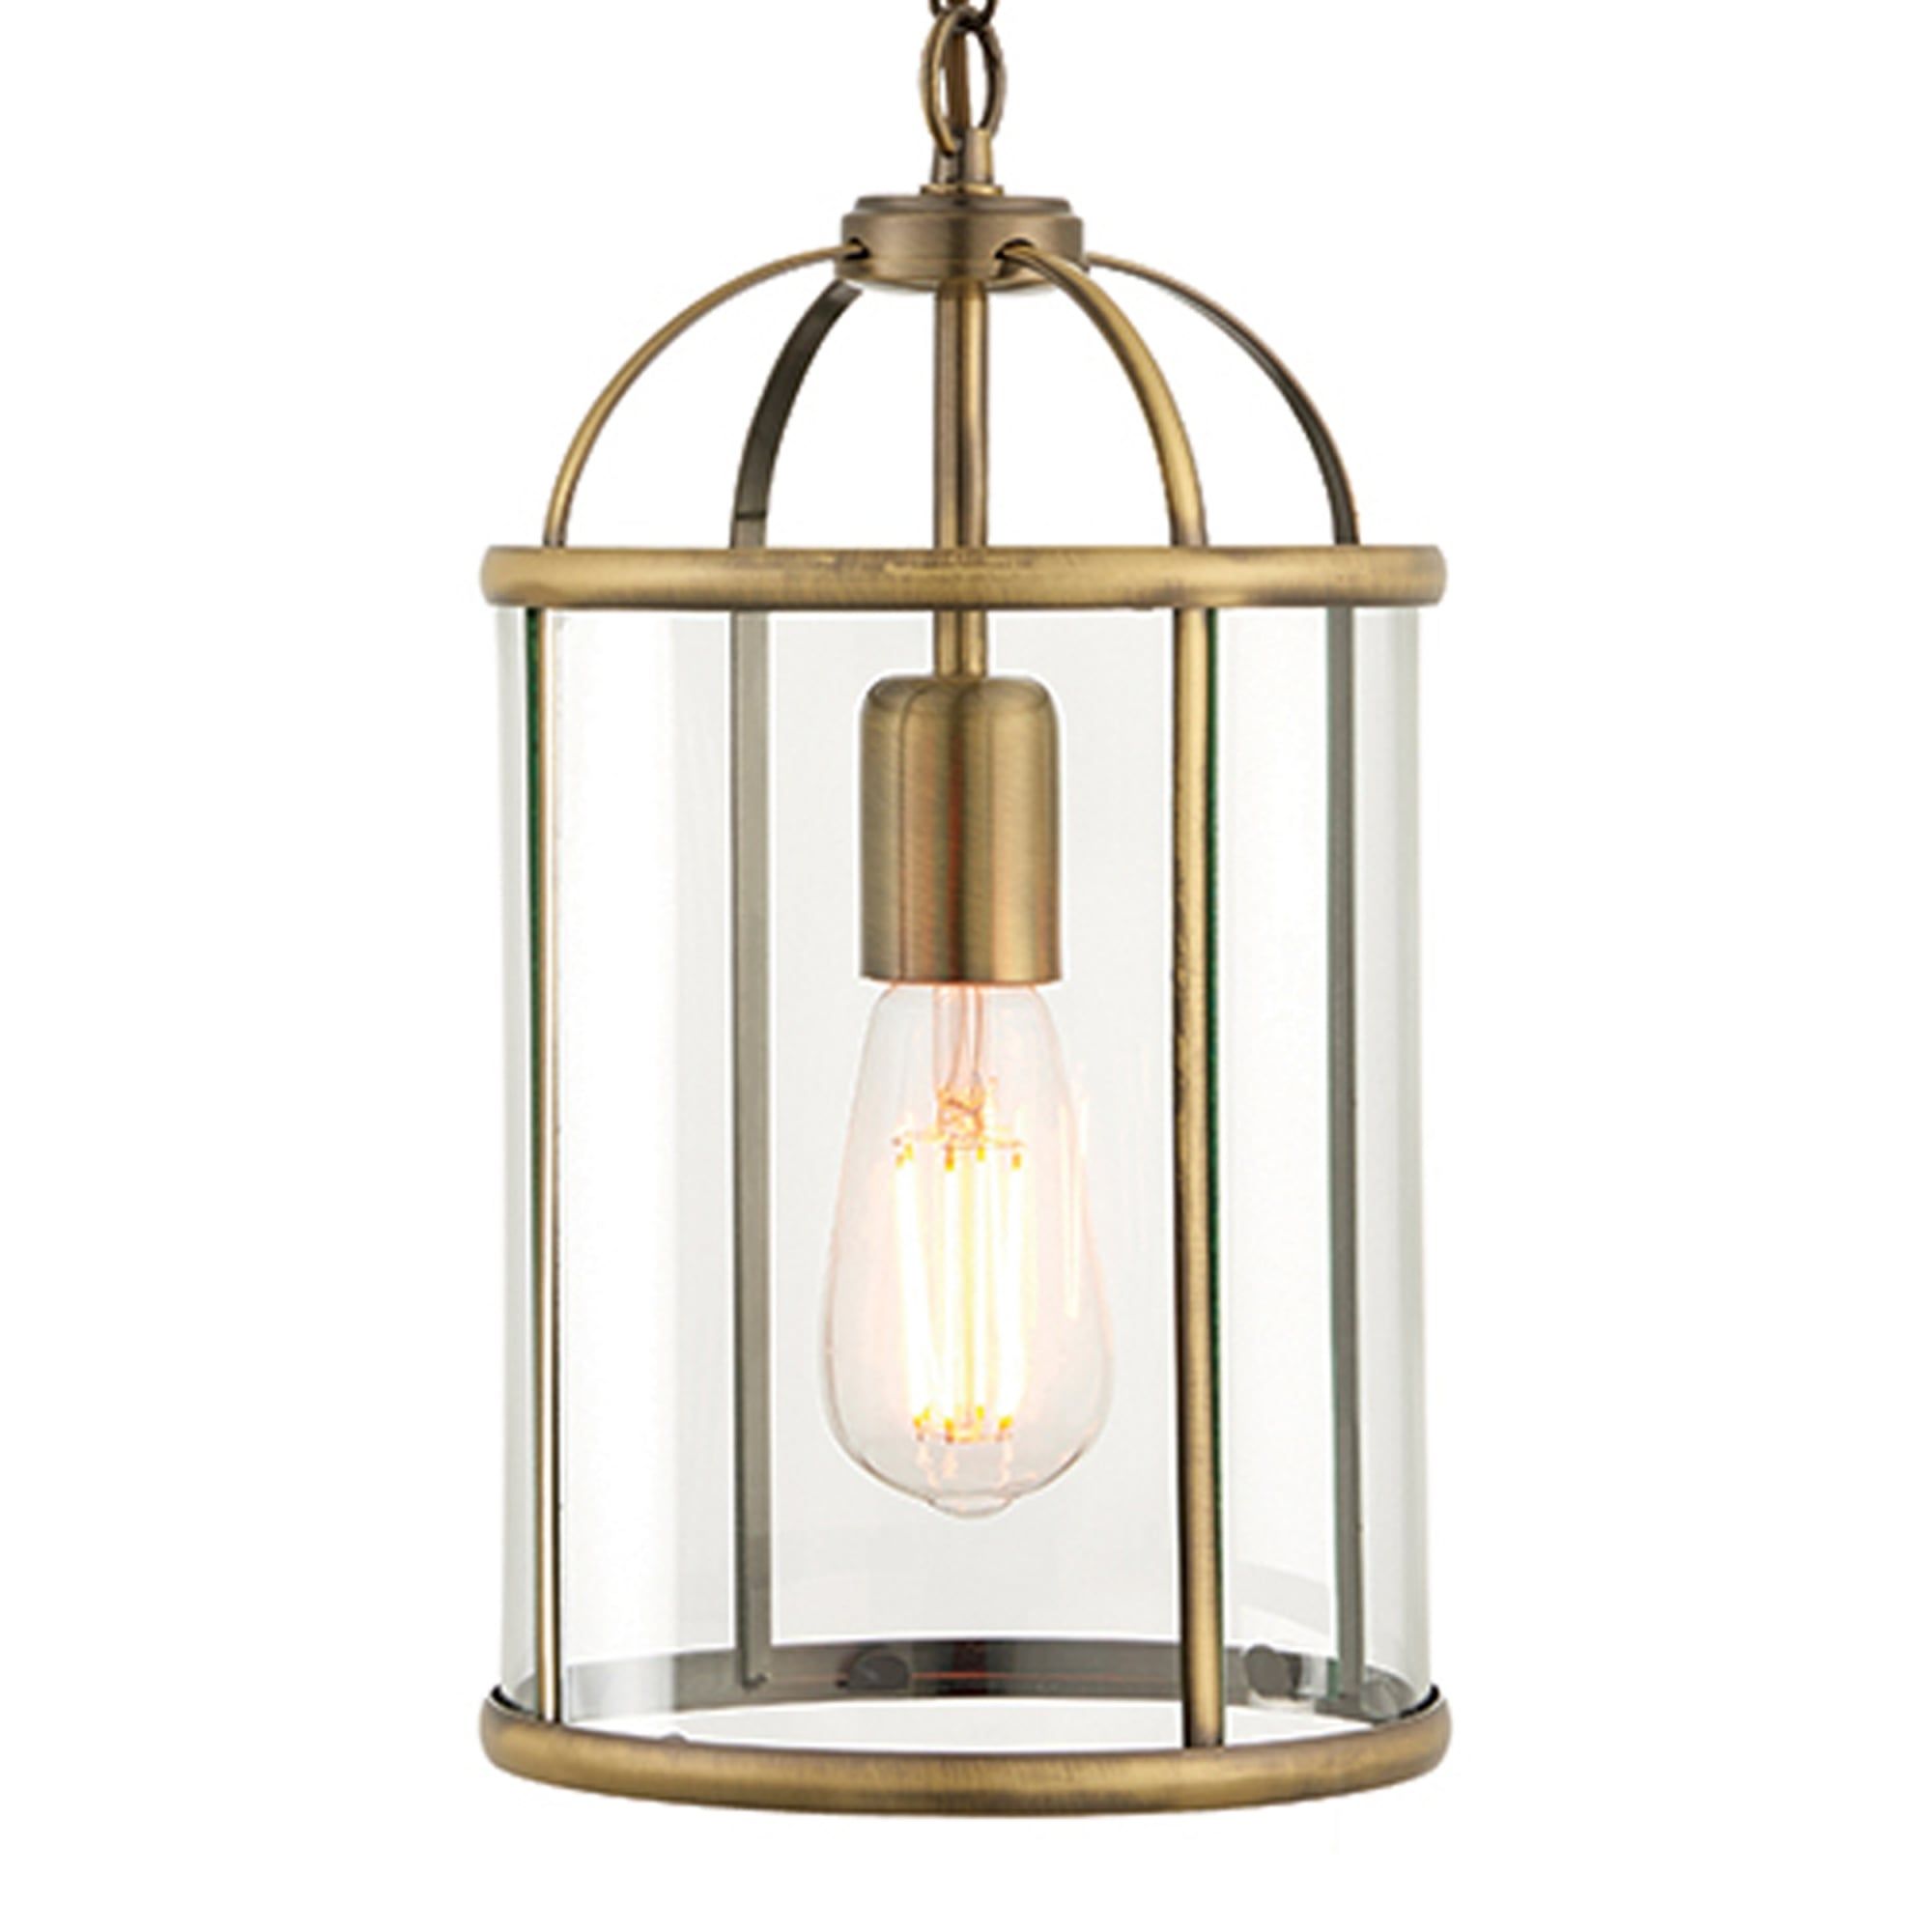 Endon 69454 Lambeth 1 Light Antique Brass And Glass Lantern Pendant For Aged Brass Lantern Chandeliers (View 6 of 15)